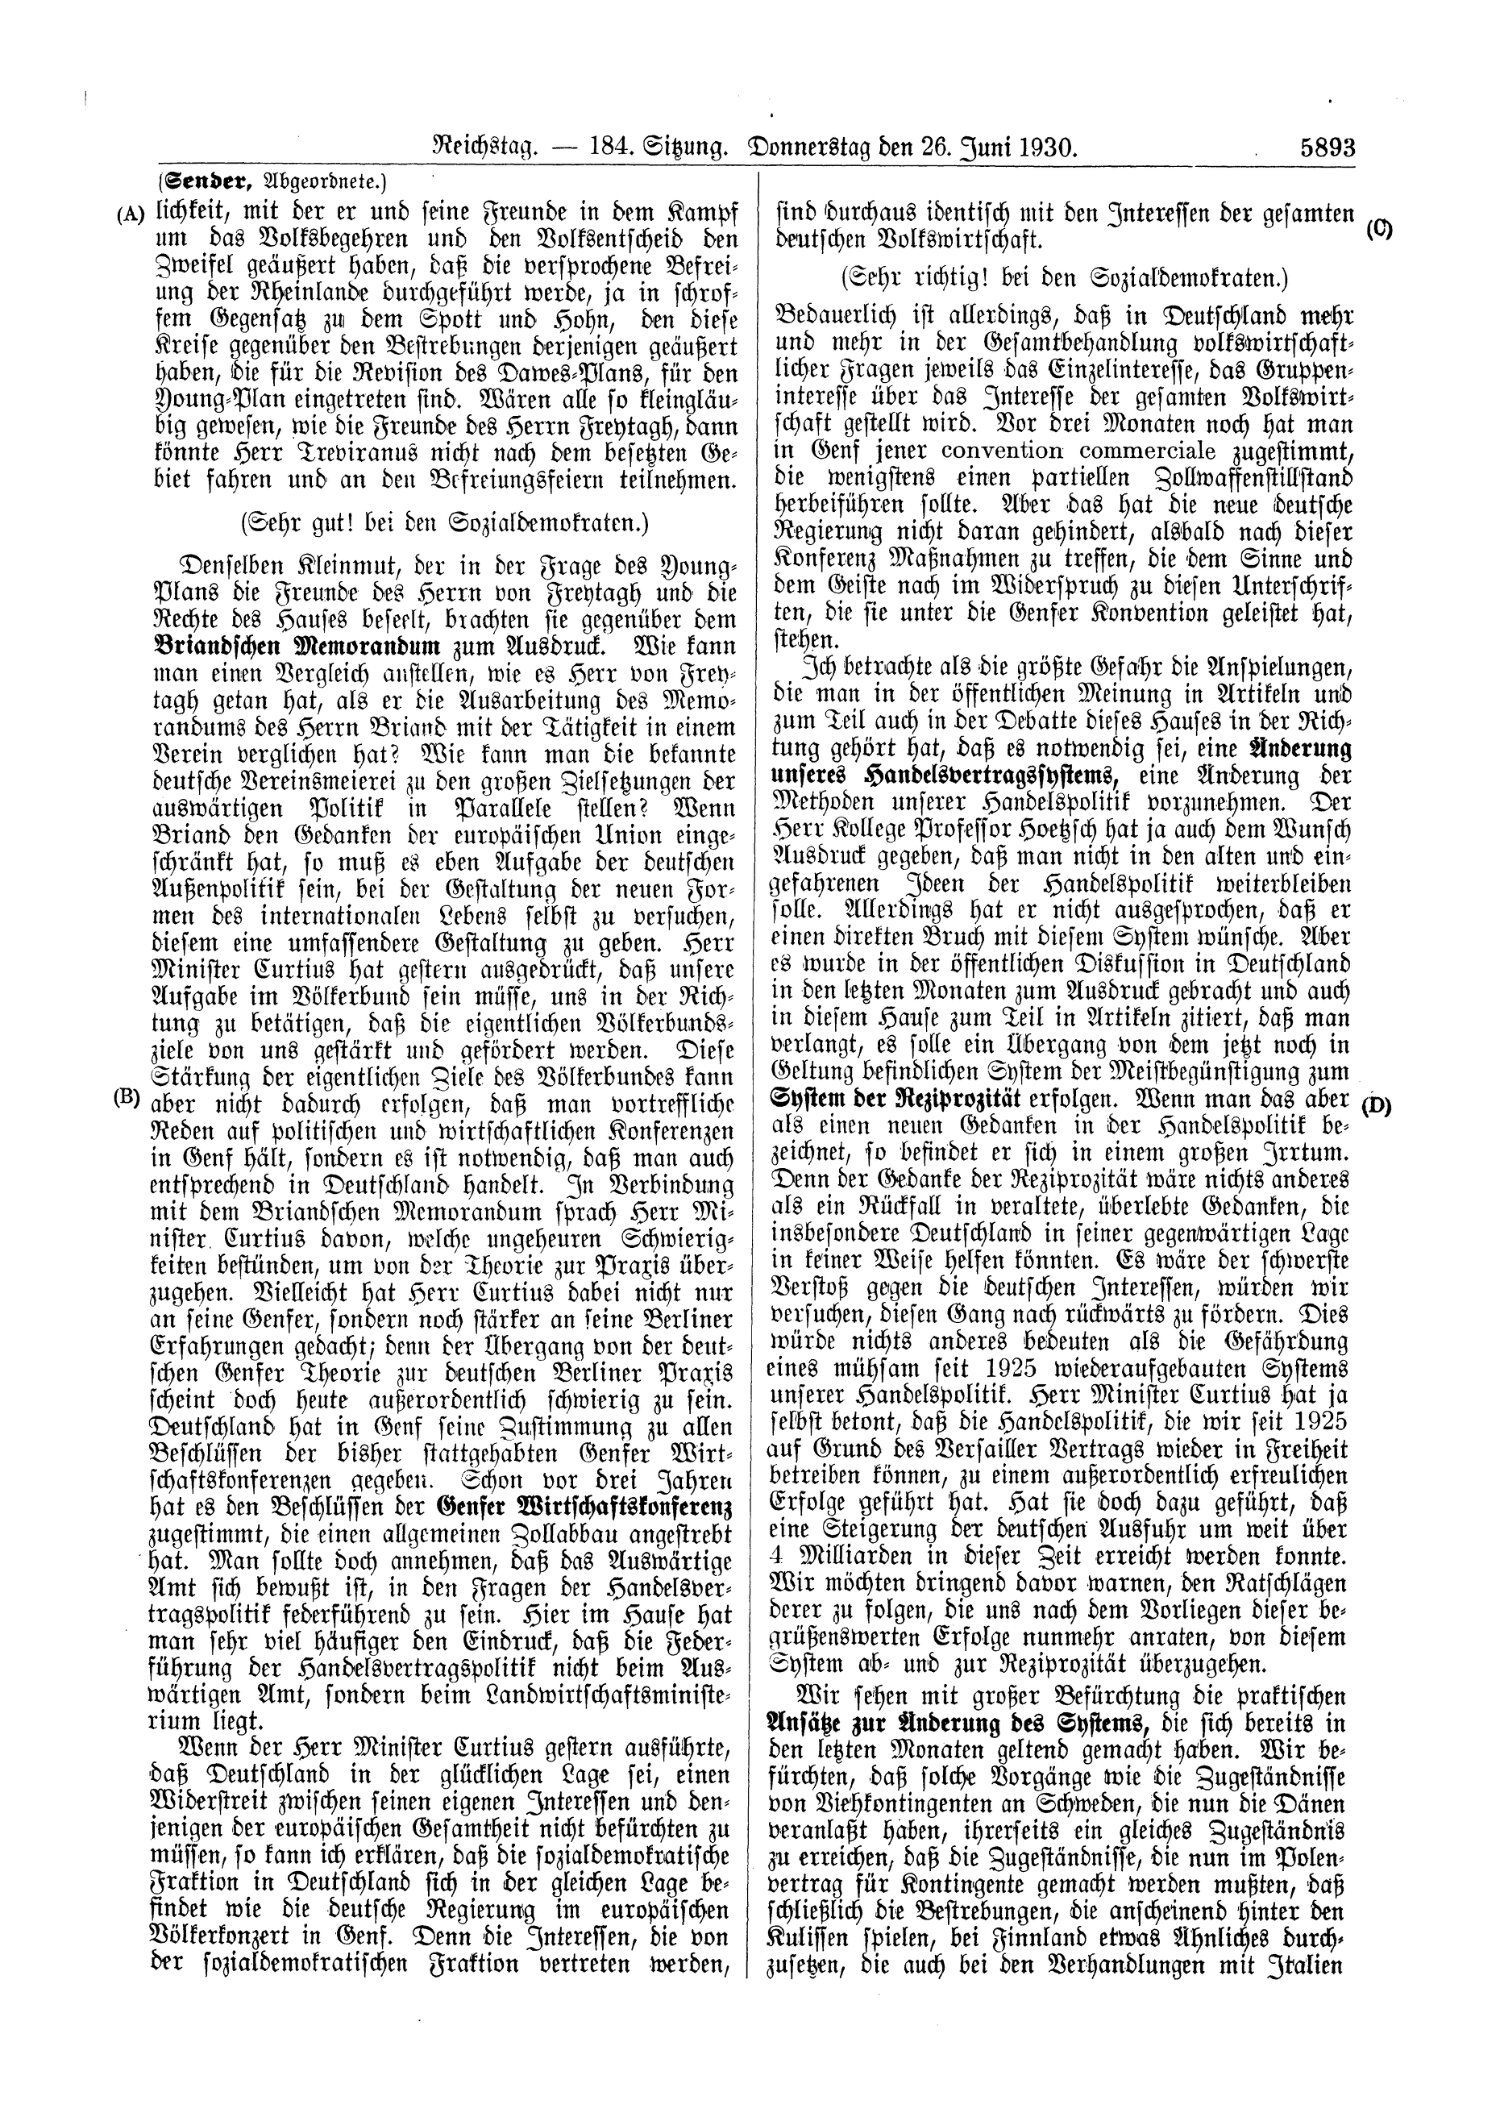 Scan of page 5893